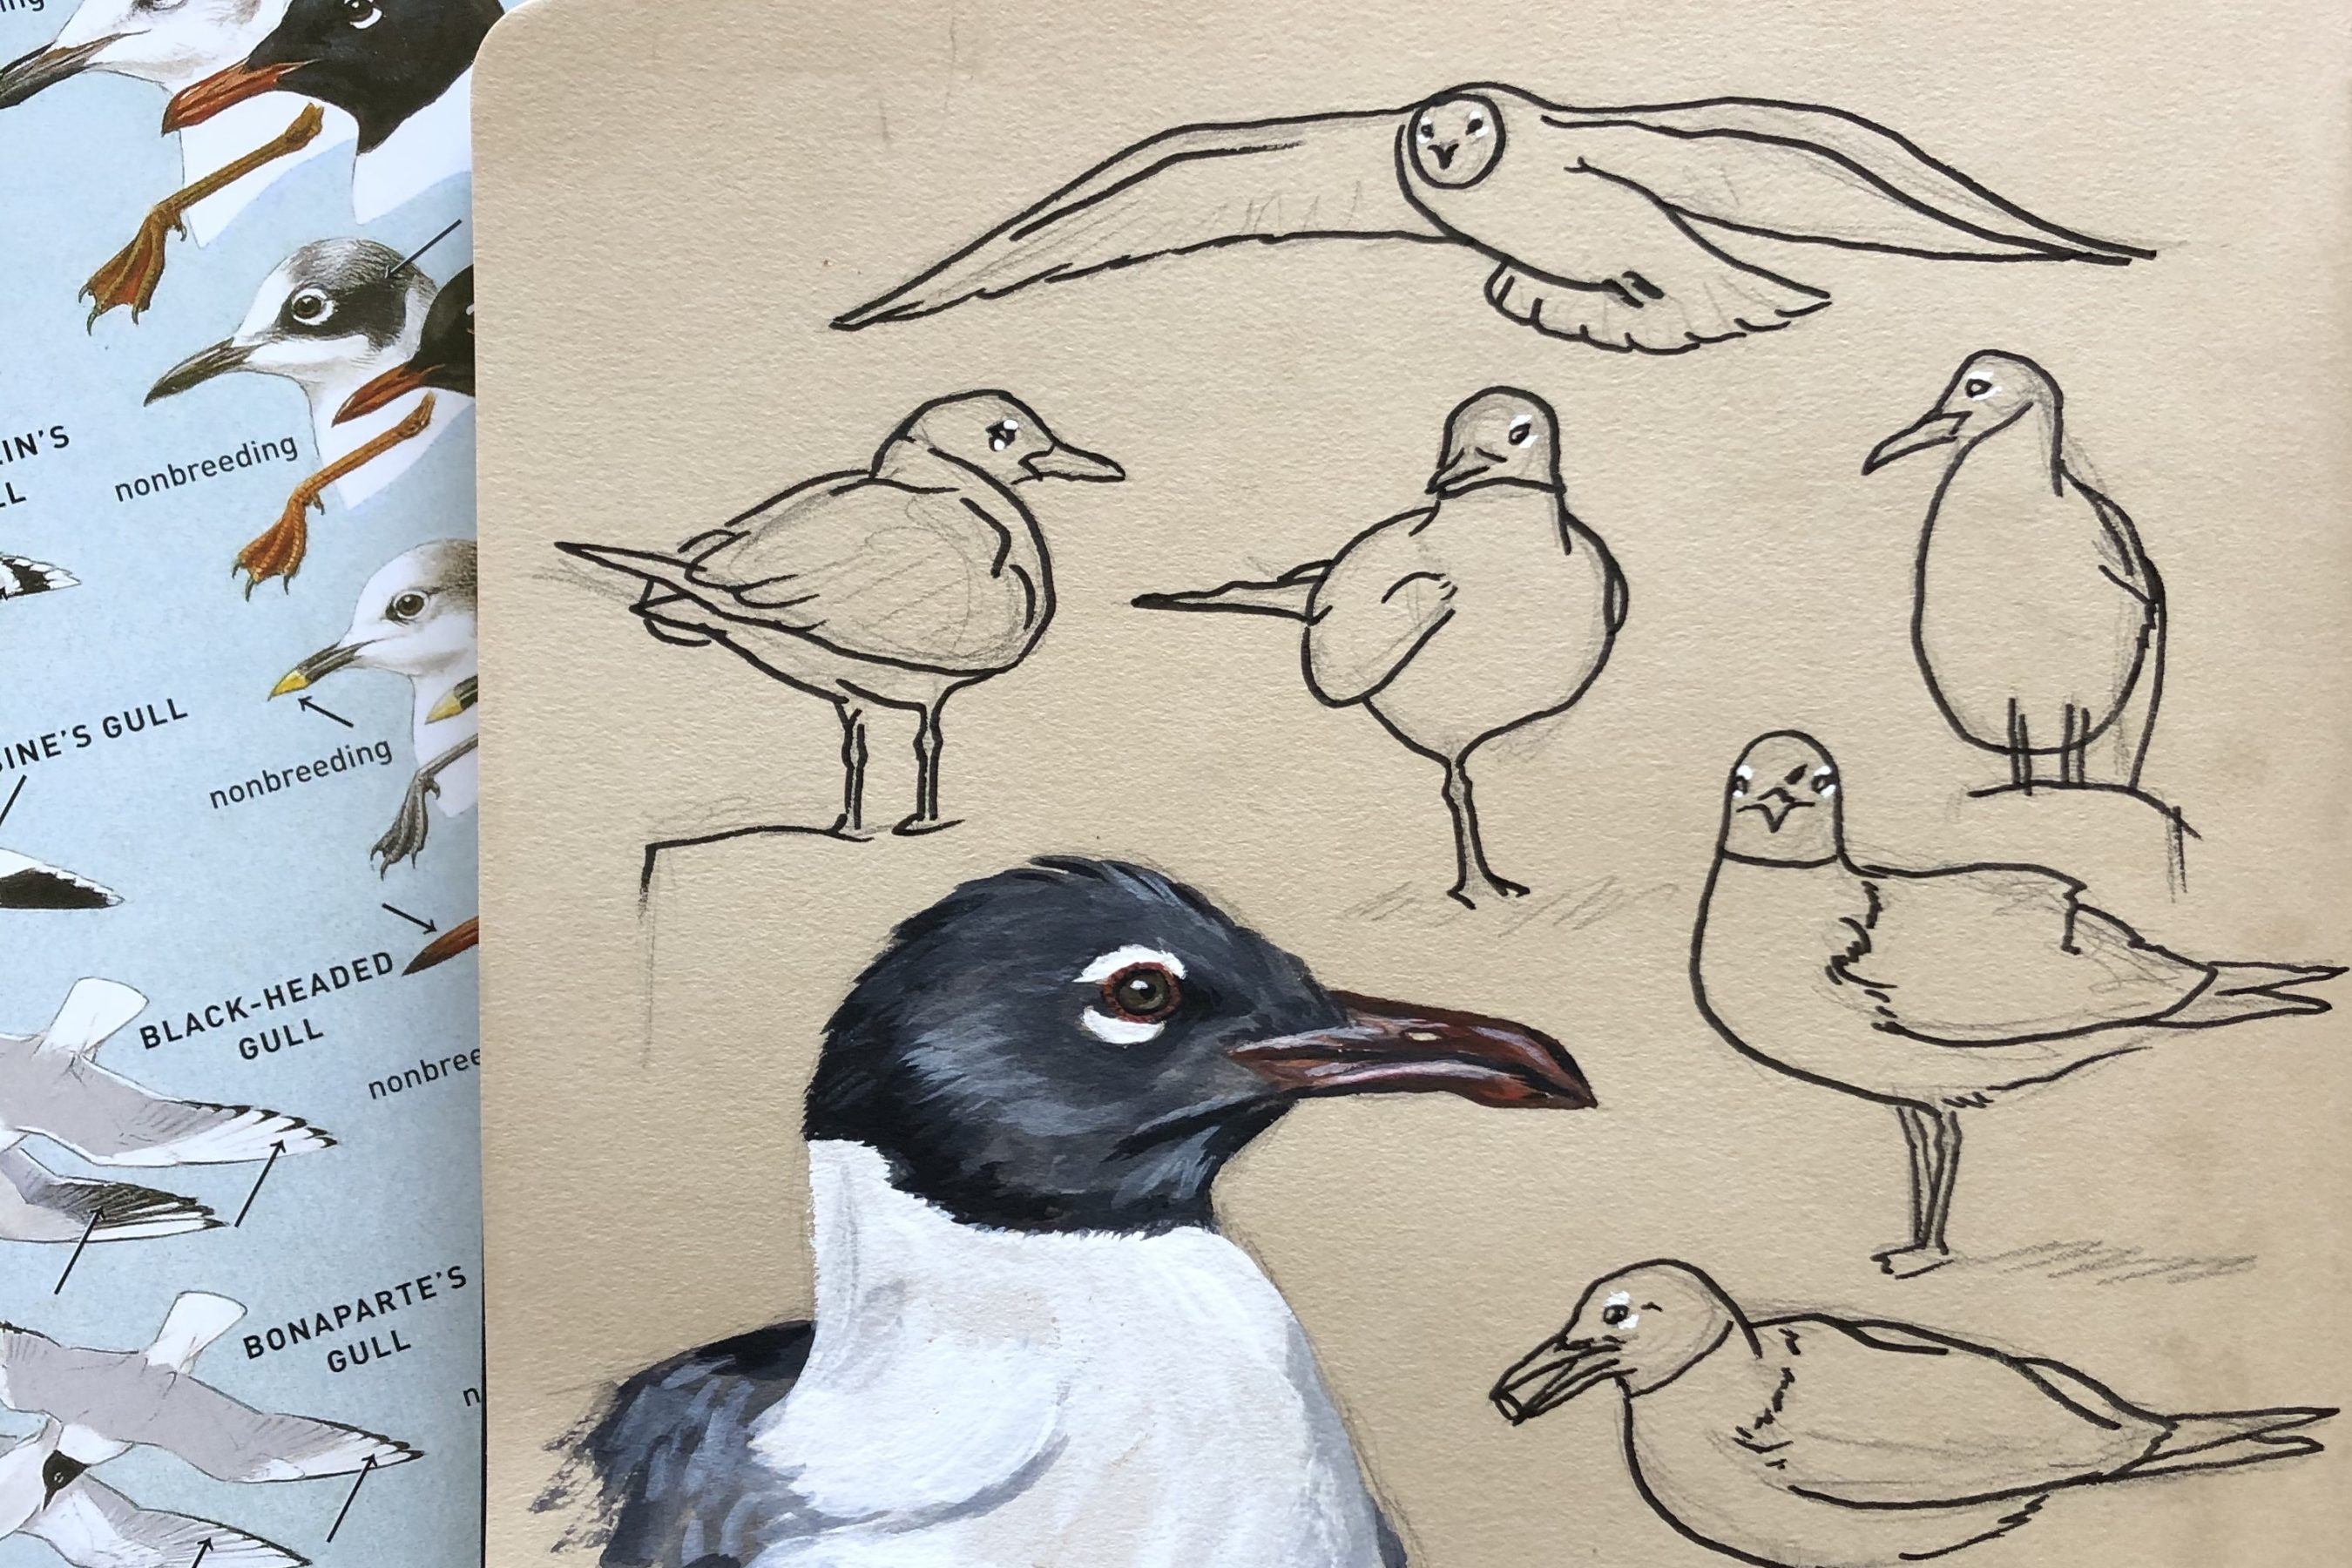 Sketchbook of drawings and painting of Laughing Gulls